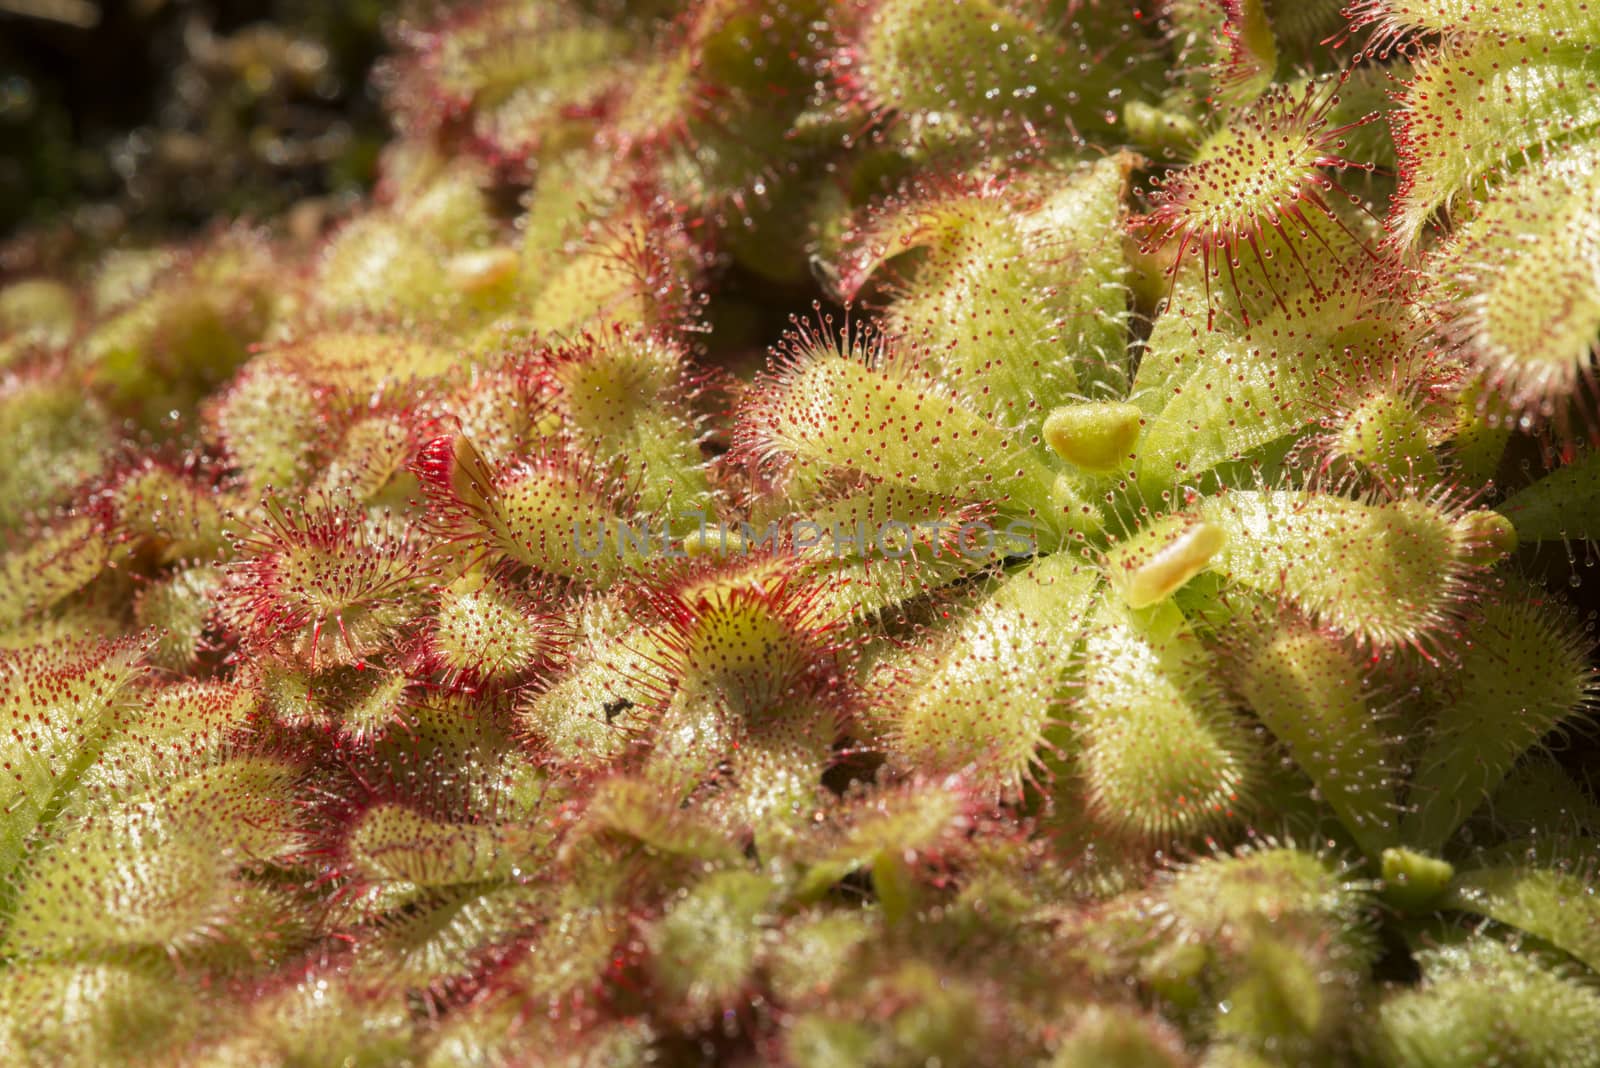 Sundew insectivorous plants with red sticky droplets.